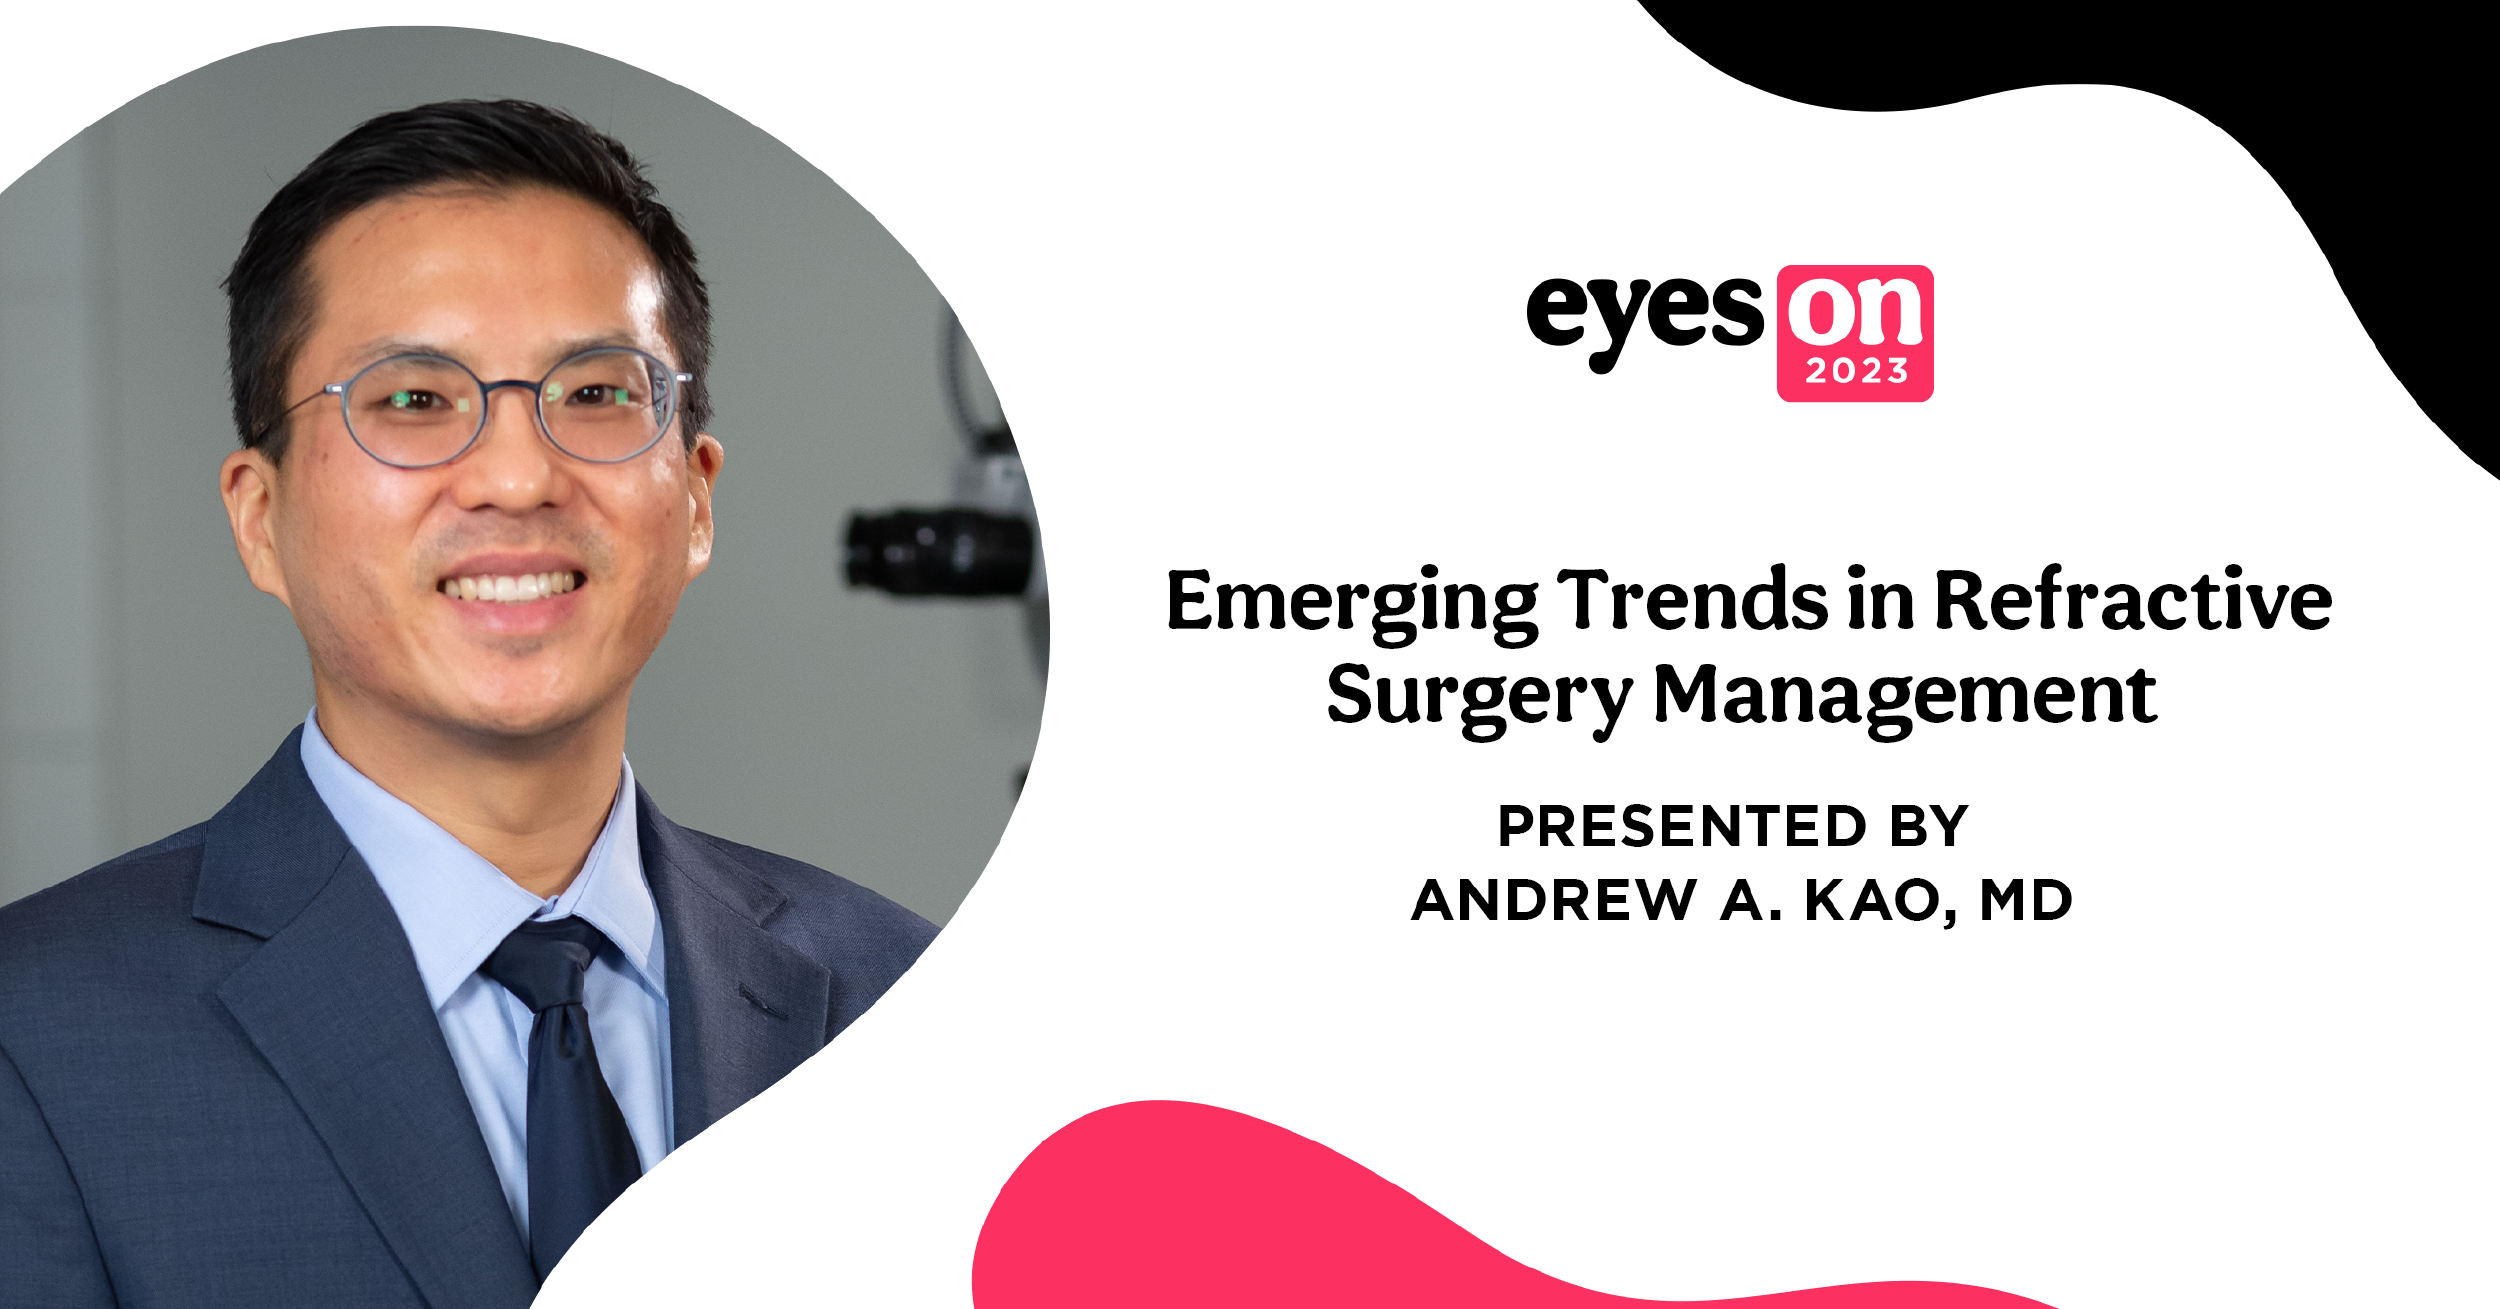 Emerging Trends in Refractive Surgery Management